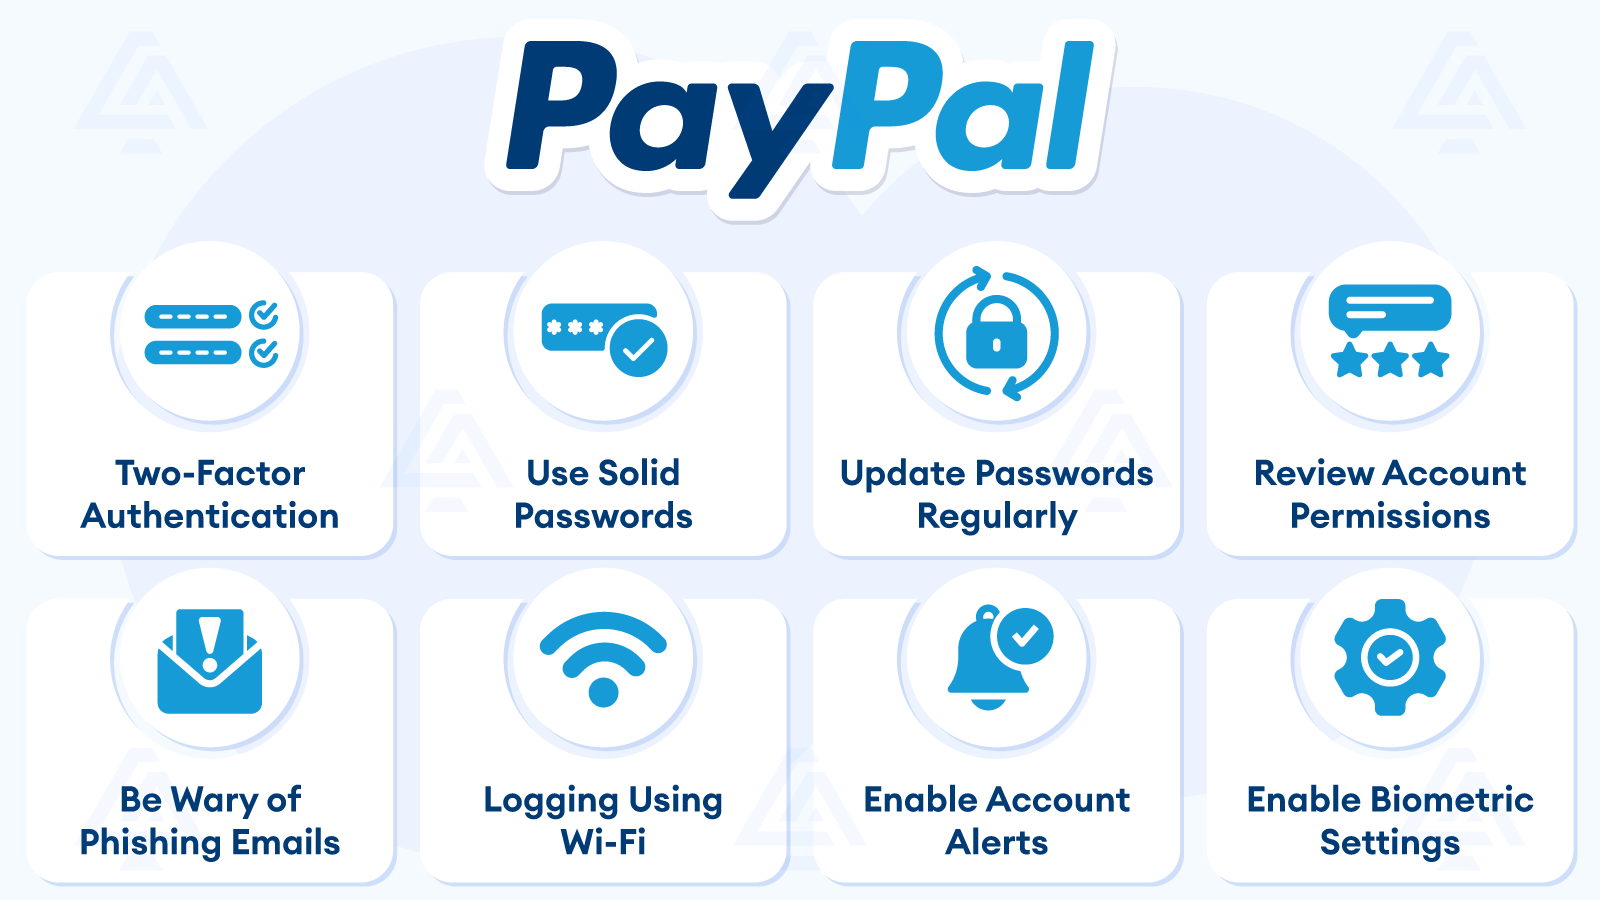 Steps to Keep Your PayPal Account Safe